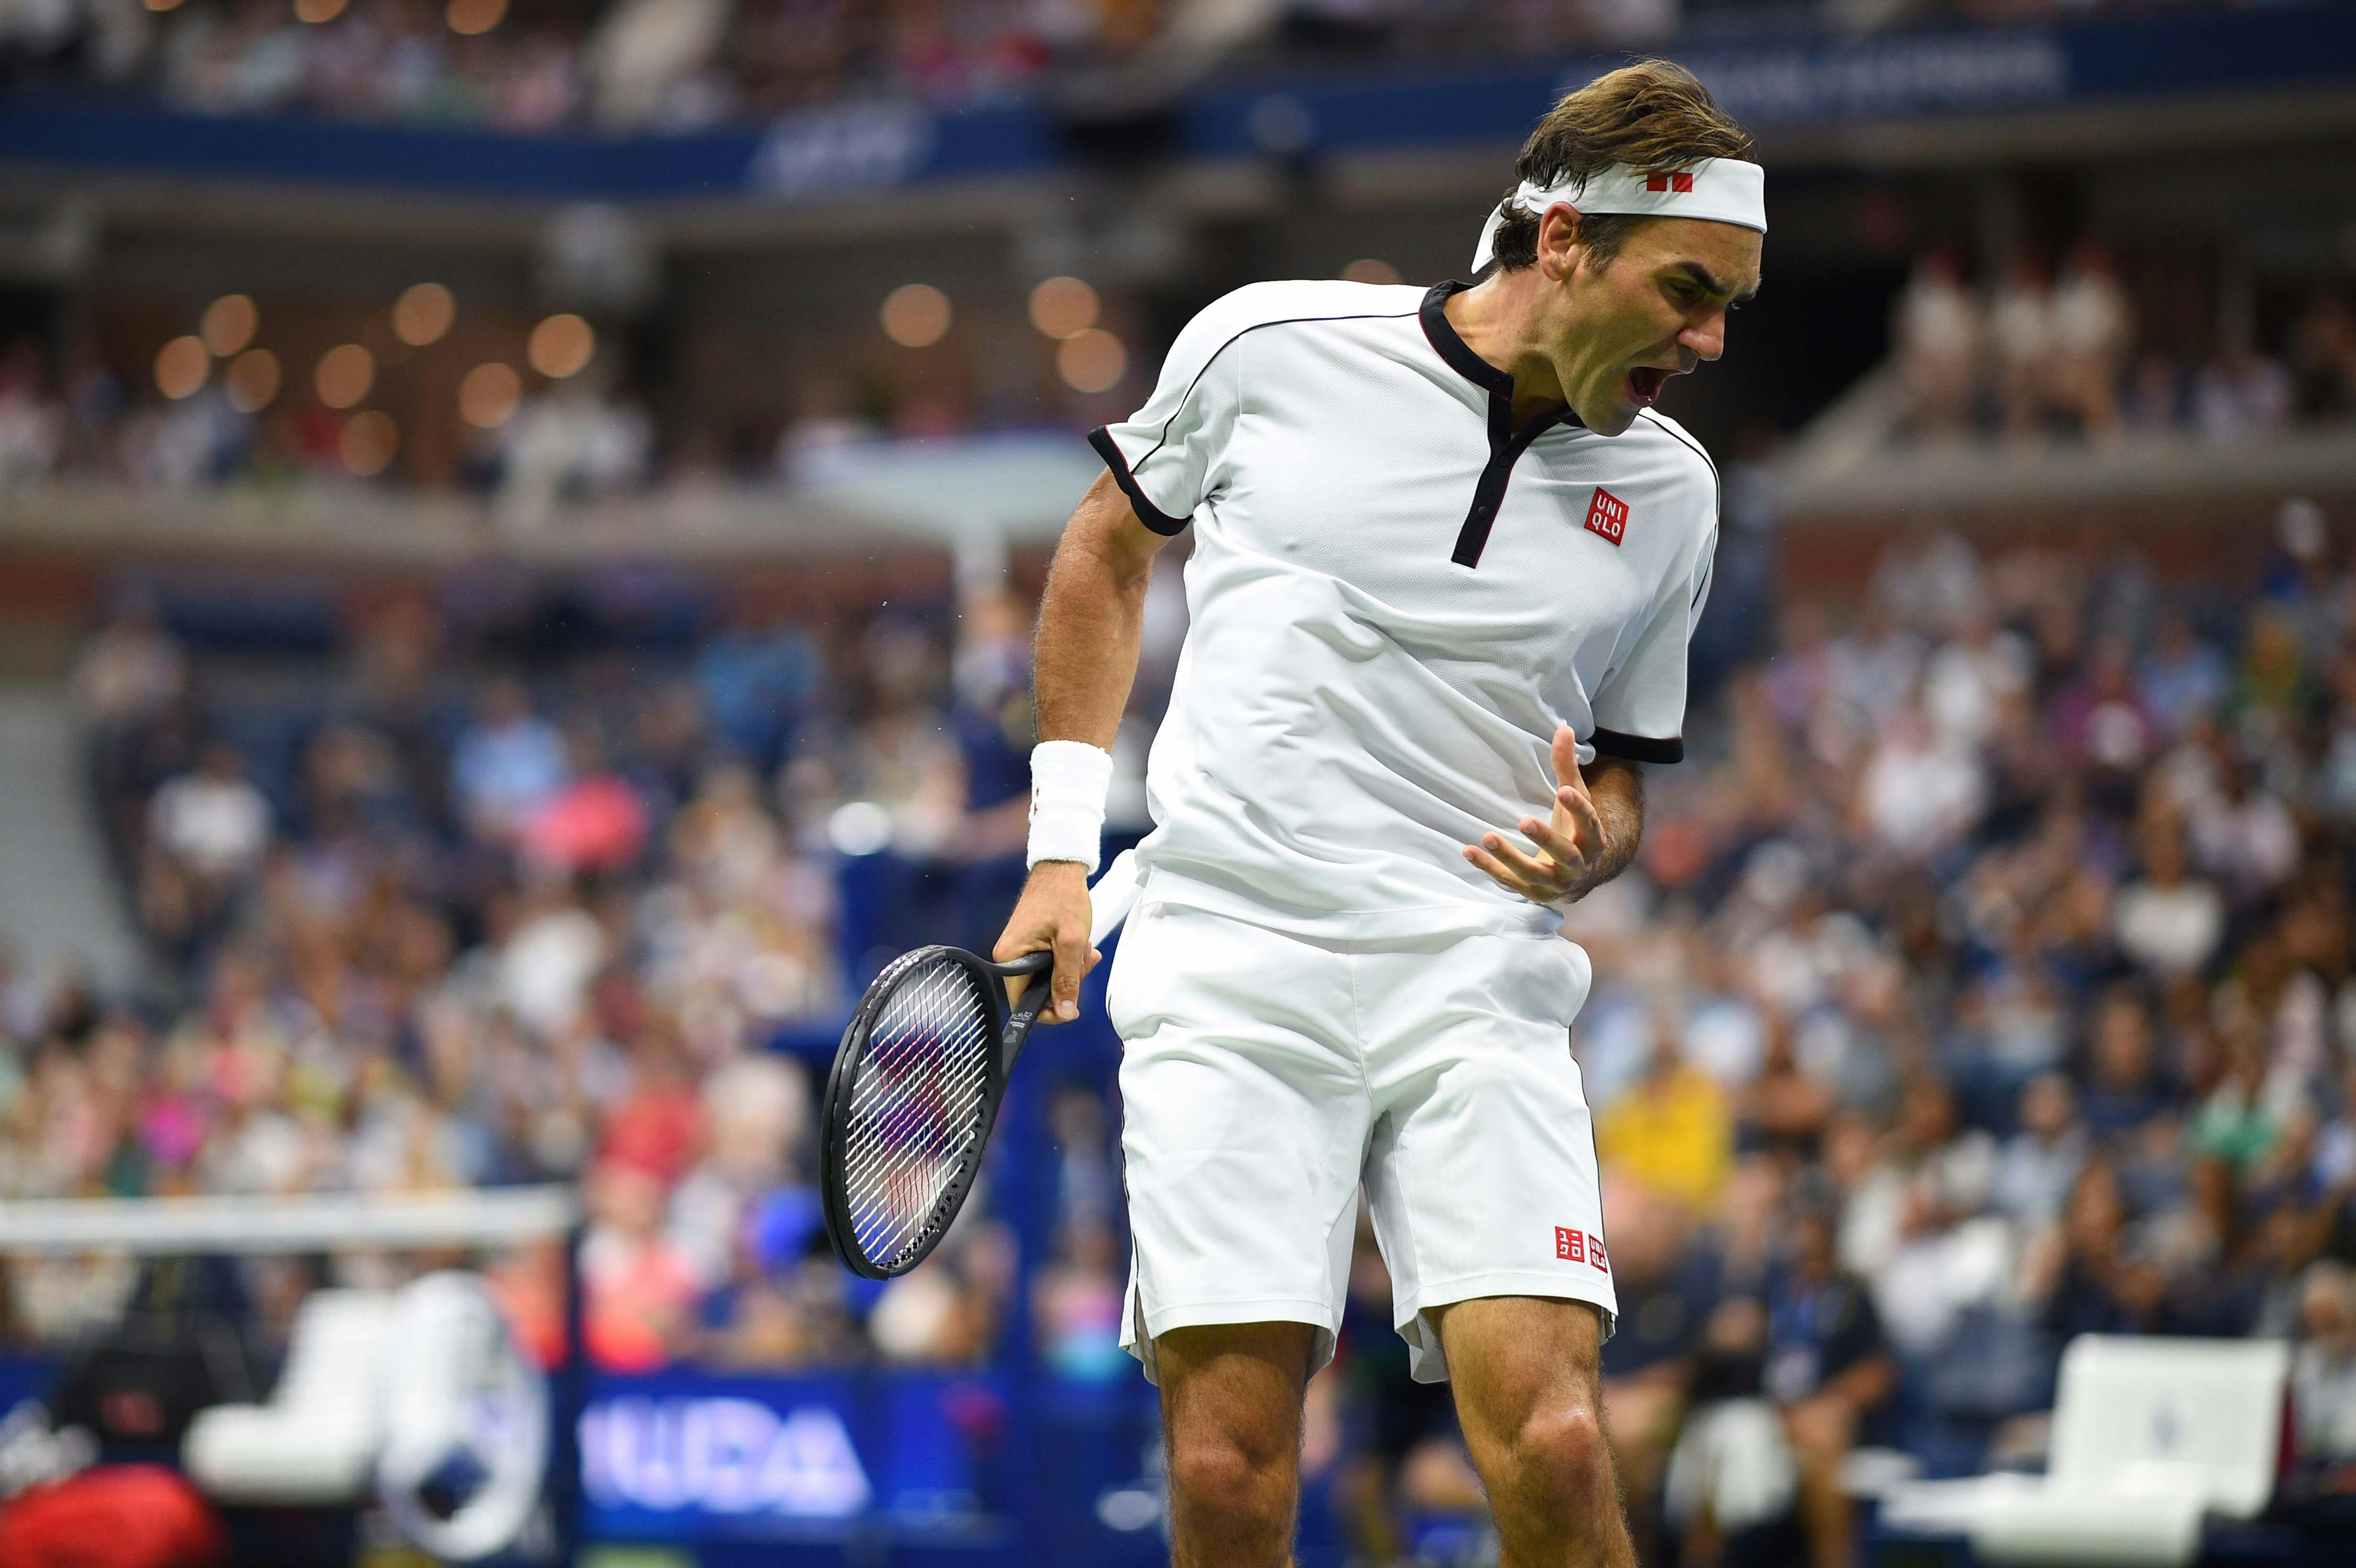 Reaction from Roger Federer during gis second round match at the 2019 US Open